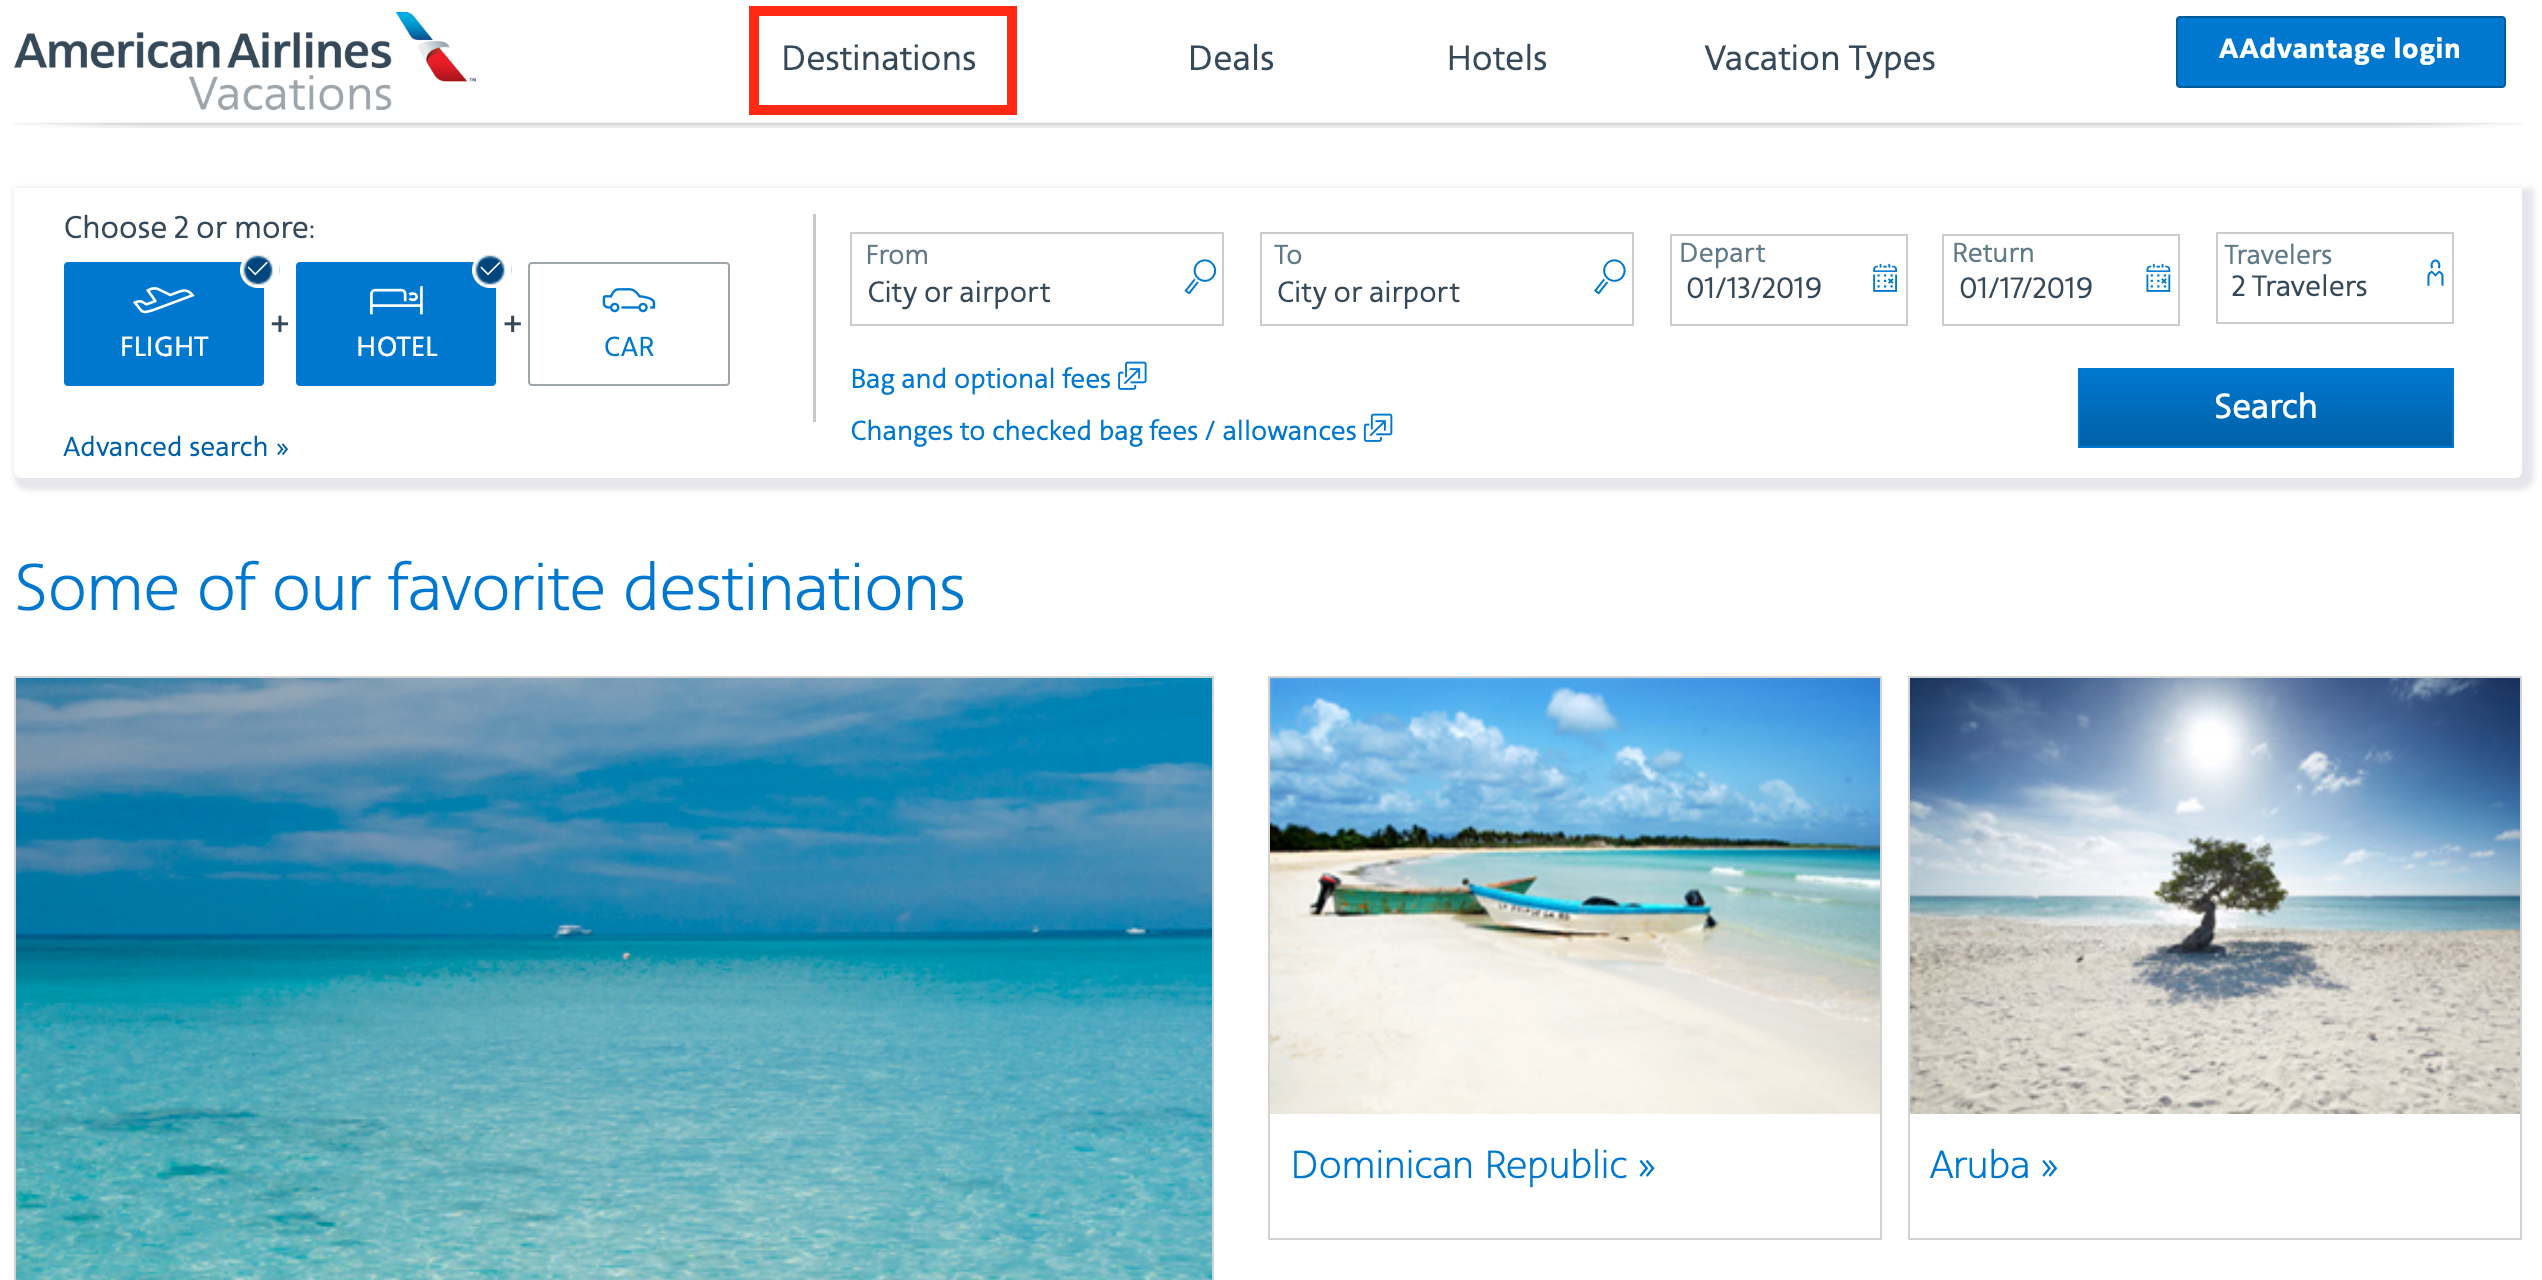 american airlines vacations travel agent login